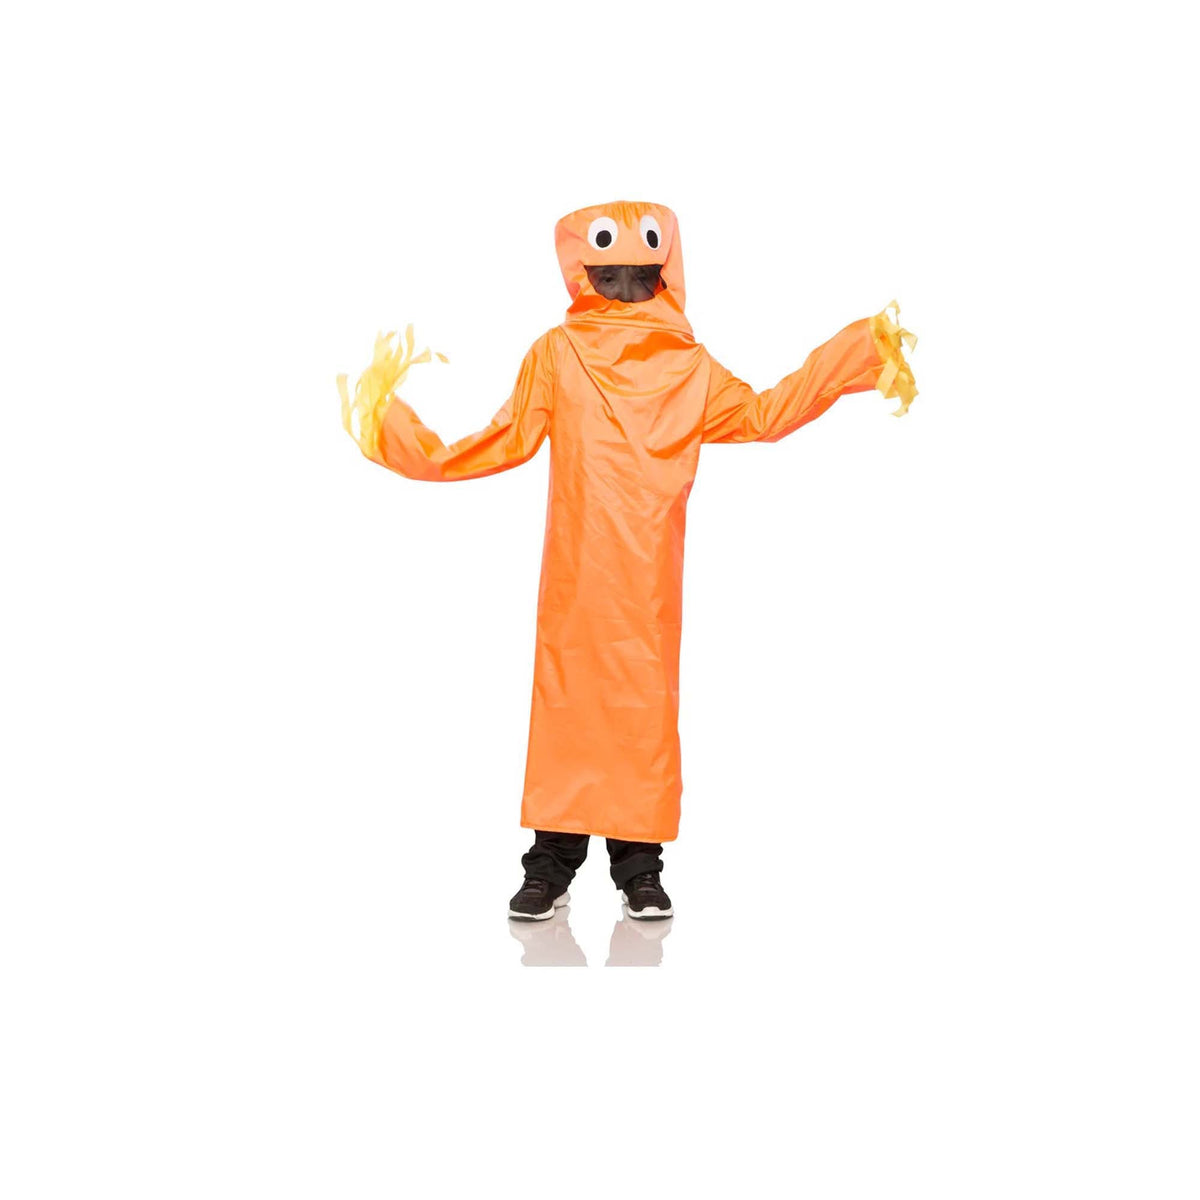 Seeing Red Inc. Costumes Orange Wild Wavy Tube Guy Costume for Kids, Pull Over